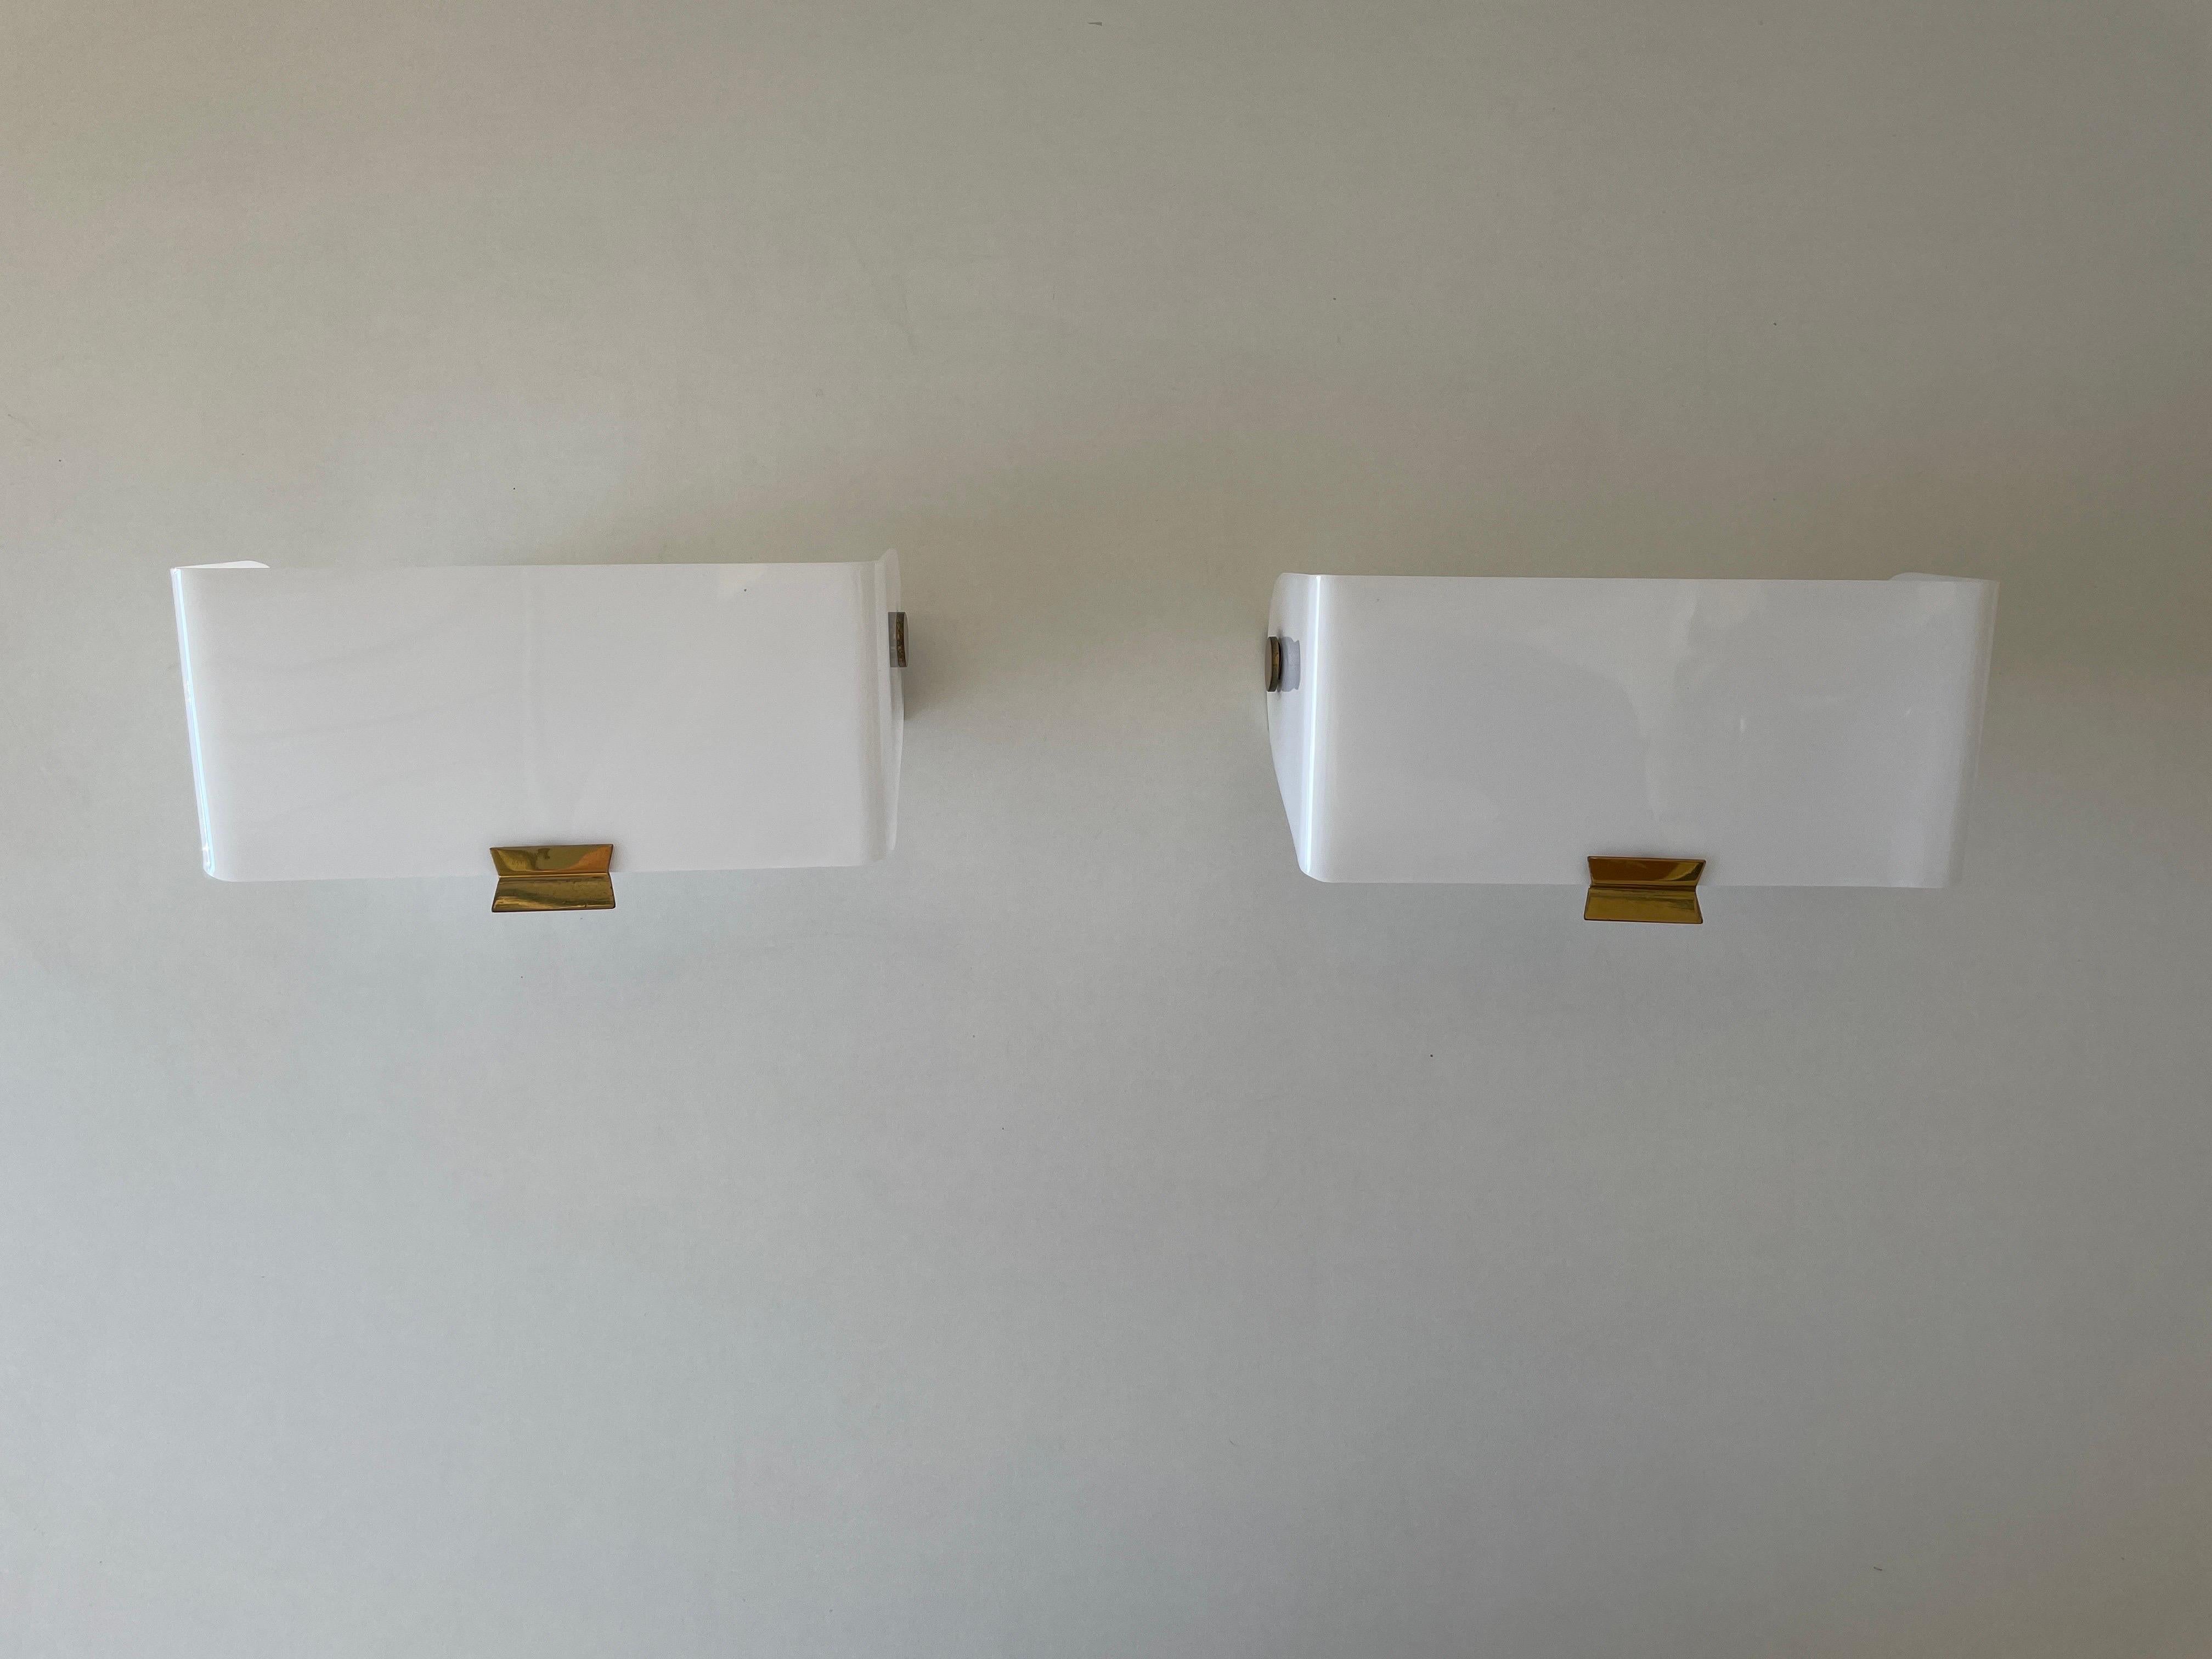 White Plexiglass Adjustable Shade Pair of Sconces, 1950s, Germany

Adjustable Reflectors

Very elegant and Minimalist wall lamps.
There are two switch on-off ropes 

Lamps are in very good condition.

These lamps works with E14 standard light bulbs.